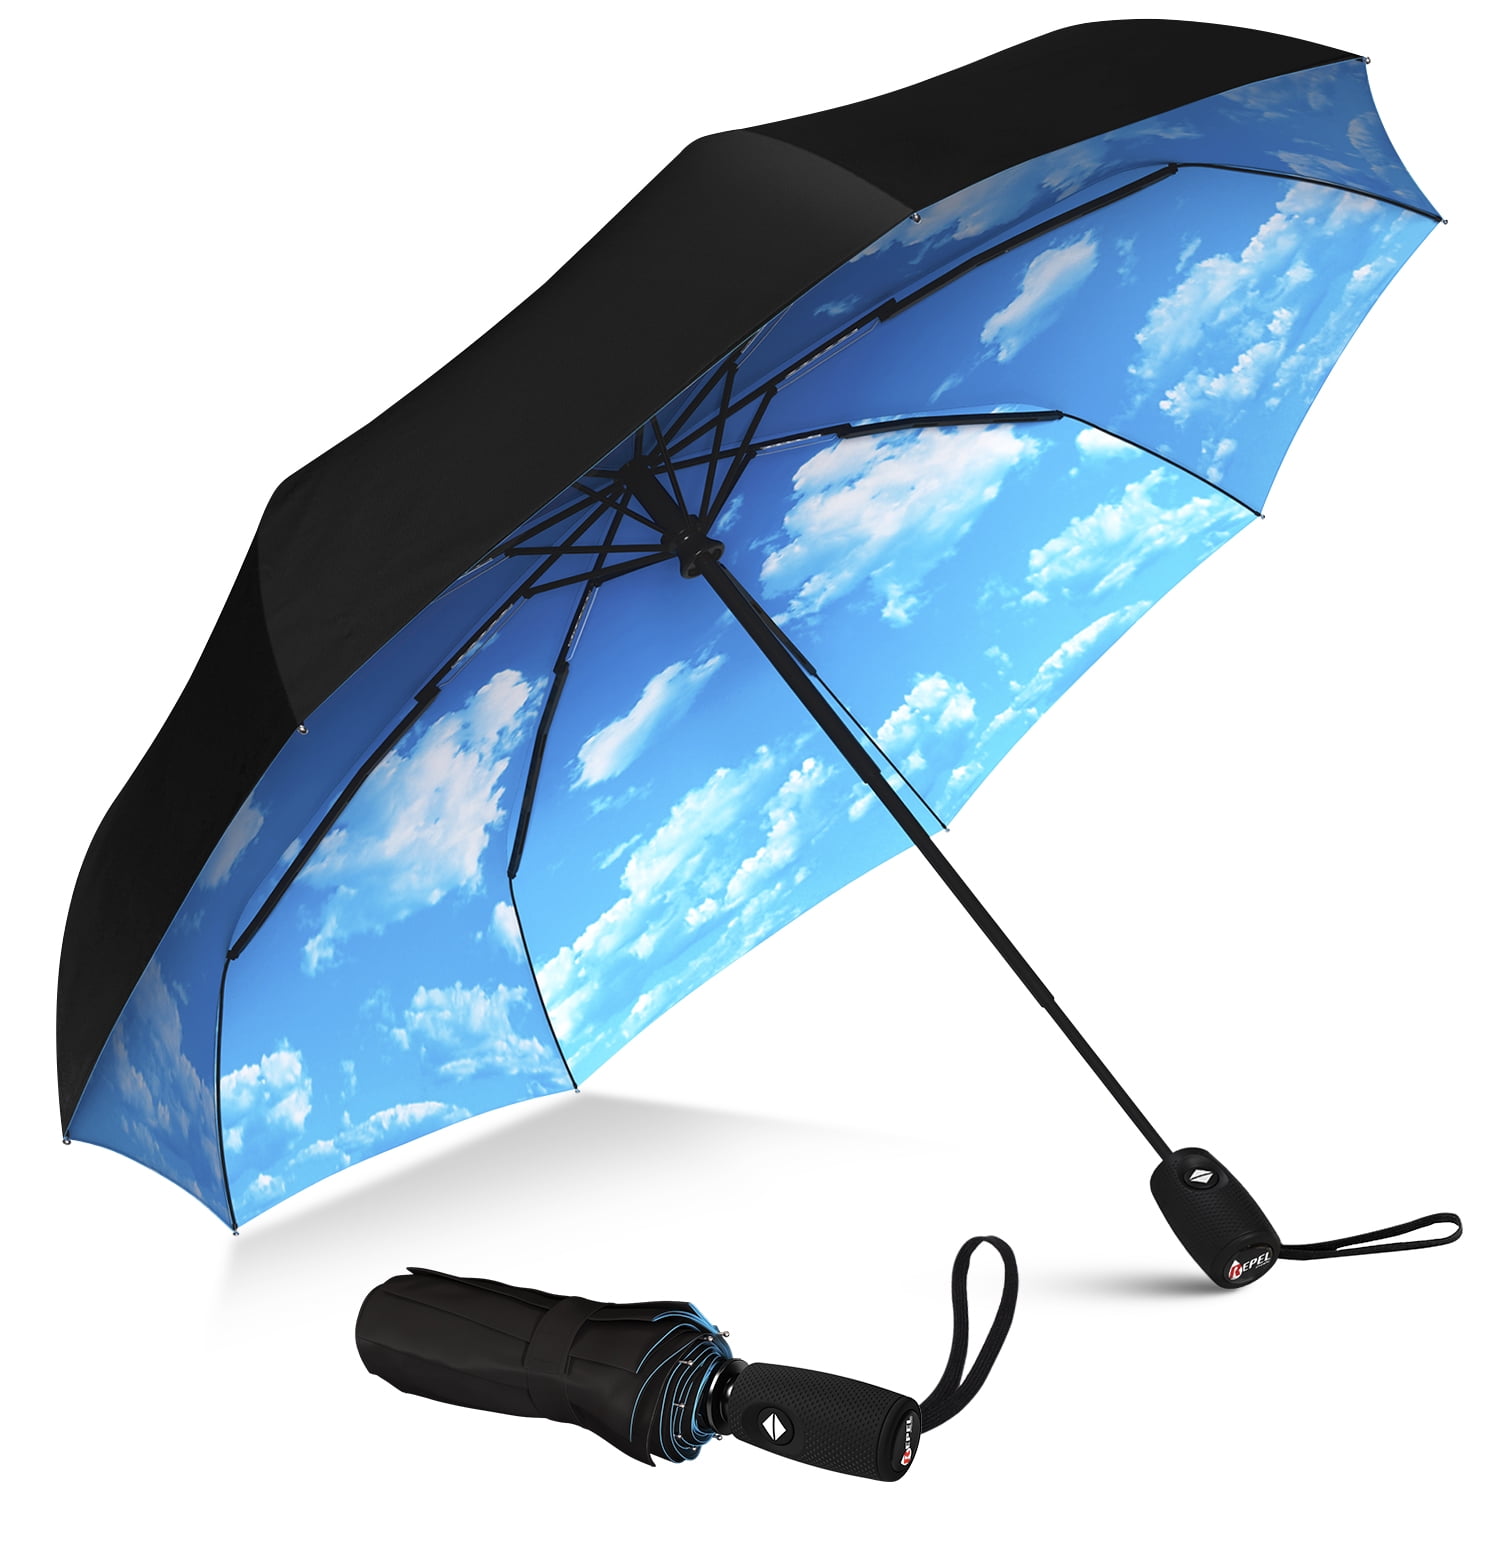 Repel Windproof Travel Umbrella Teflon Coated Double Vented Canopy Compact Automatic Blue